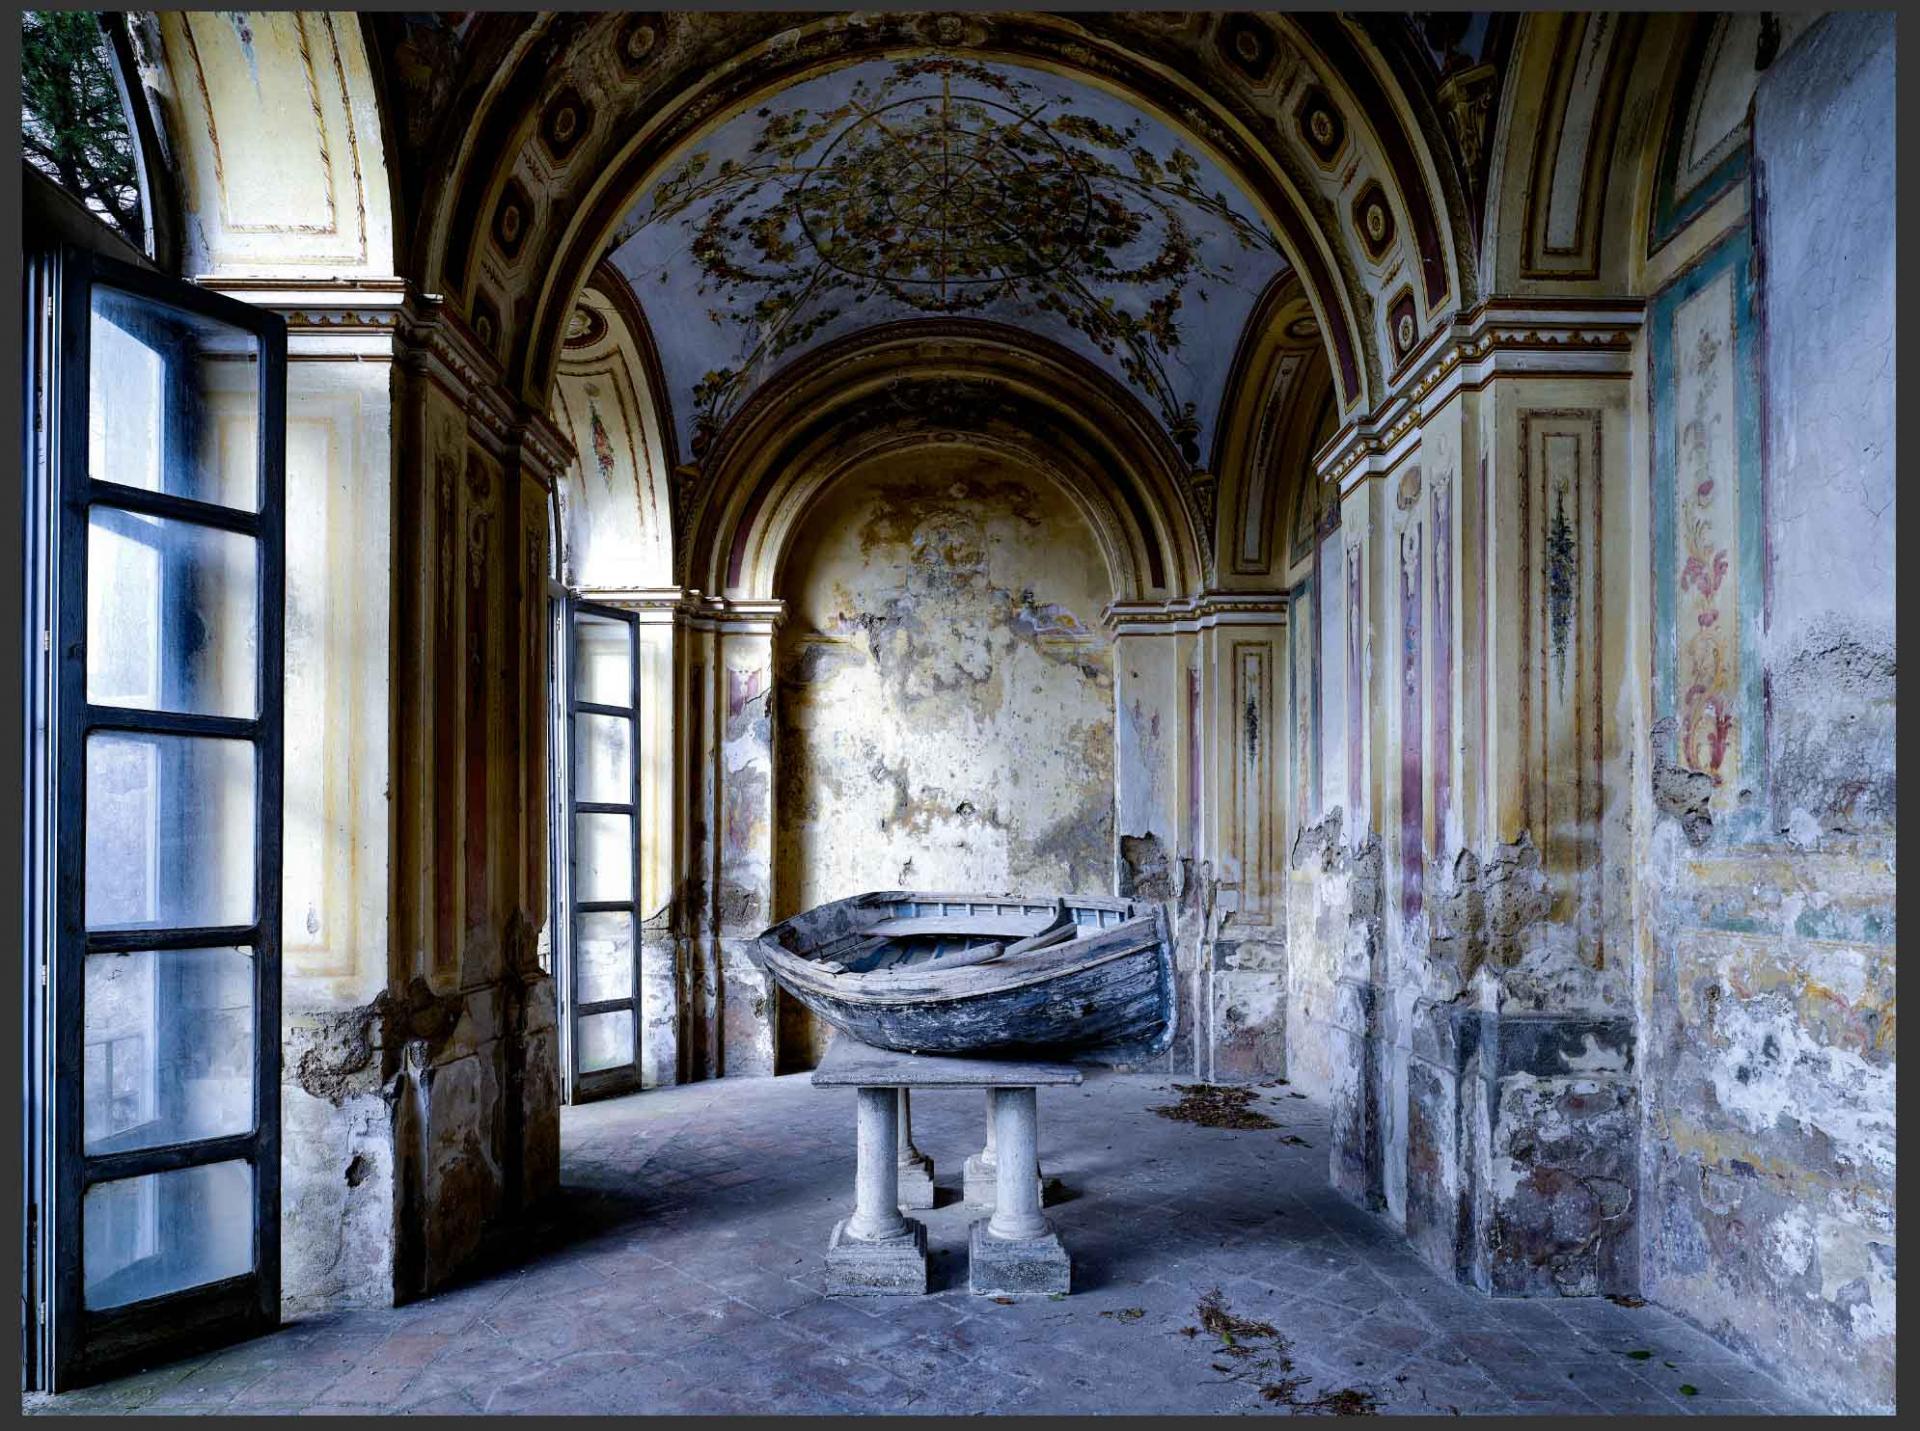 Massimo Listri
Villa Porfidia, Napoli 2020
C print Signed, dated, and numbered on verso label   

39.5 x 47.5 inches edition of 5 
47.5 x 59 inches edition of 5 
71 x 88.5 inches edition of 5  

The photographer is based in Florence, and is